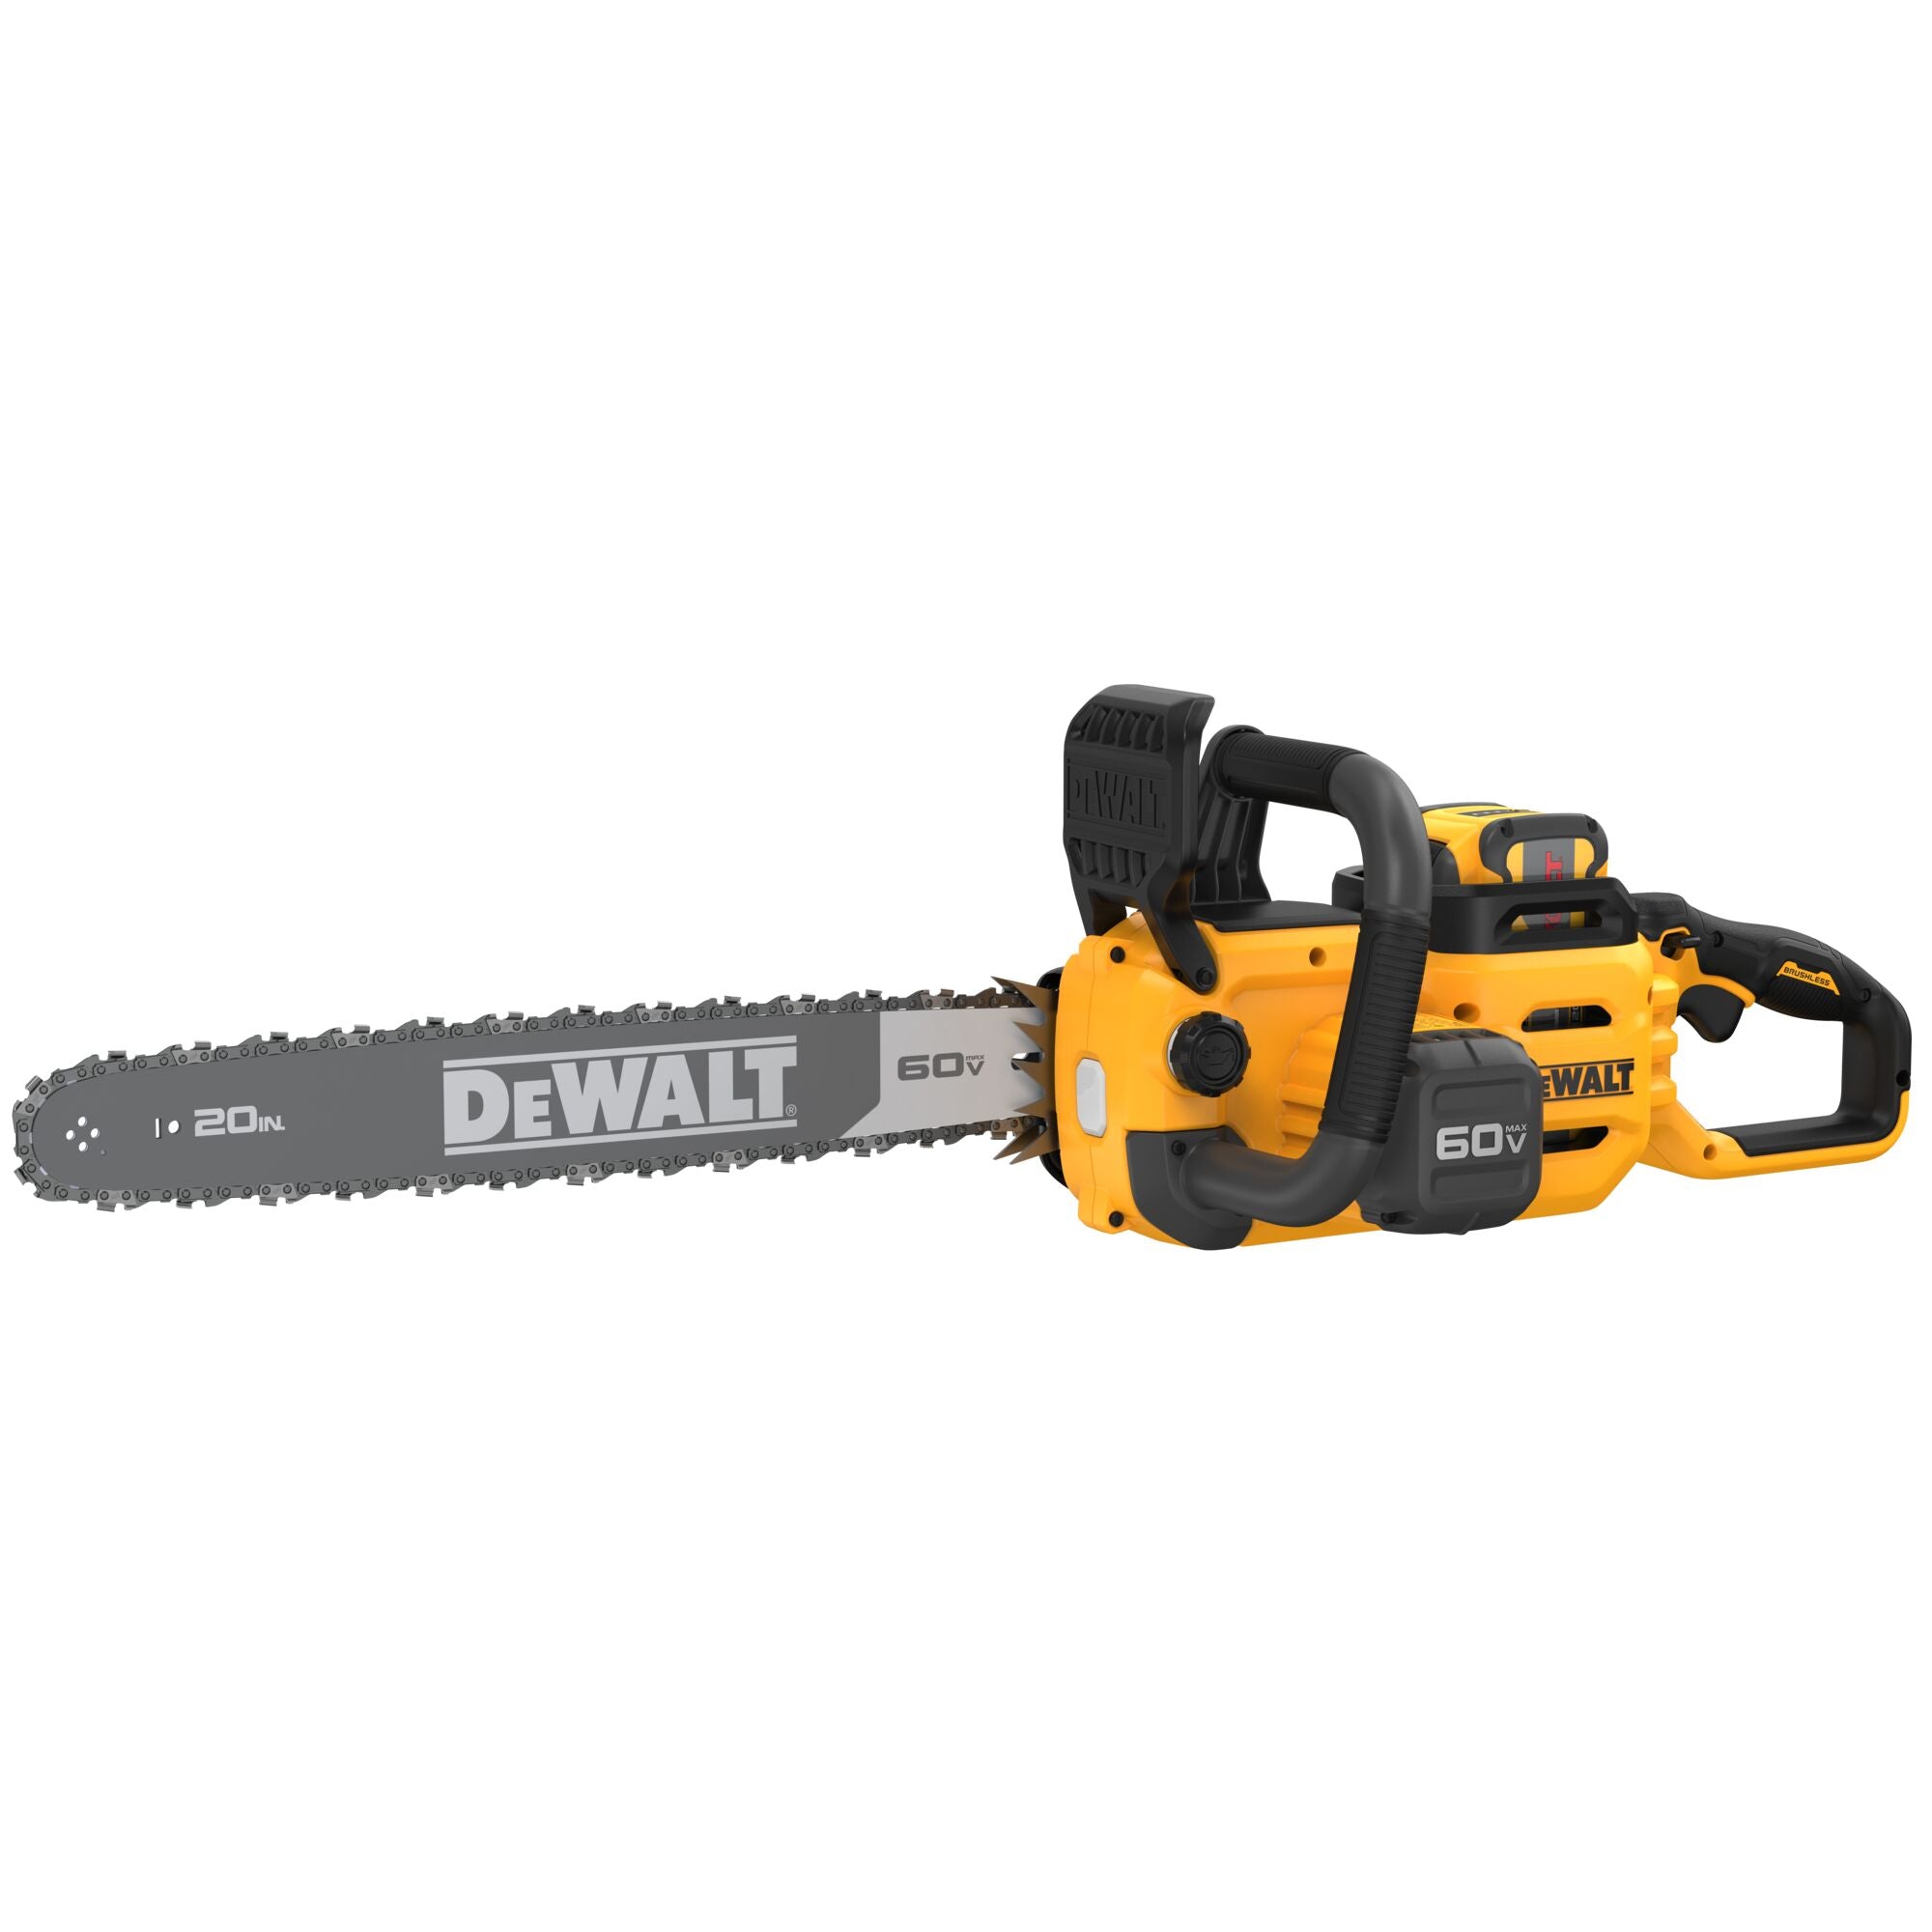 DeWALT DCCS677Z1 Chainsaw 20" 60 Volt Brushless Kit with Battery and Charger